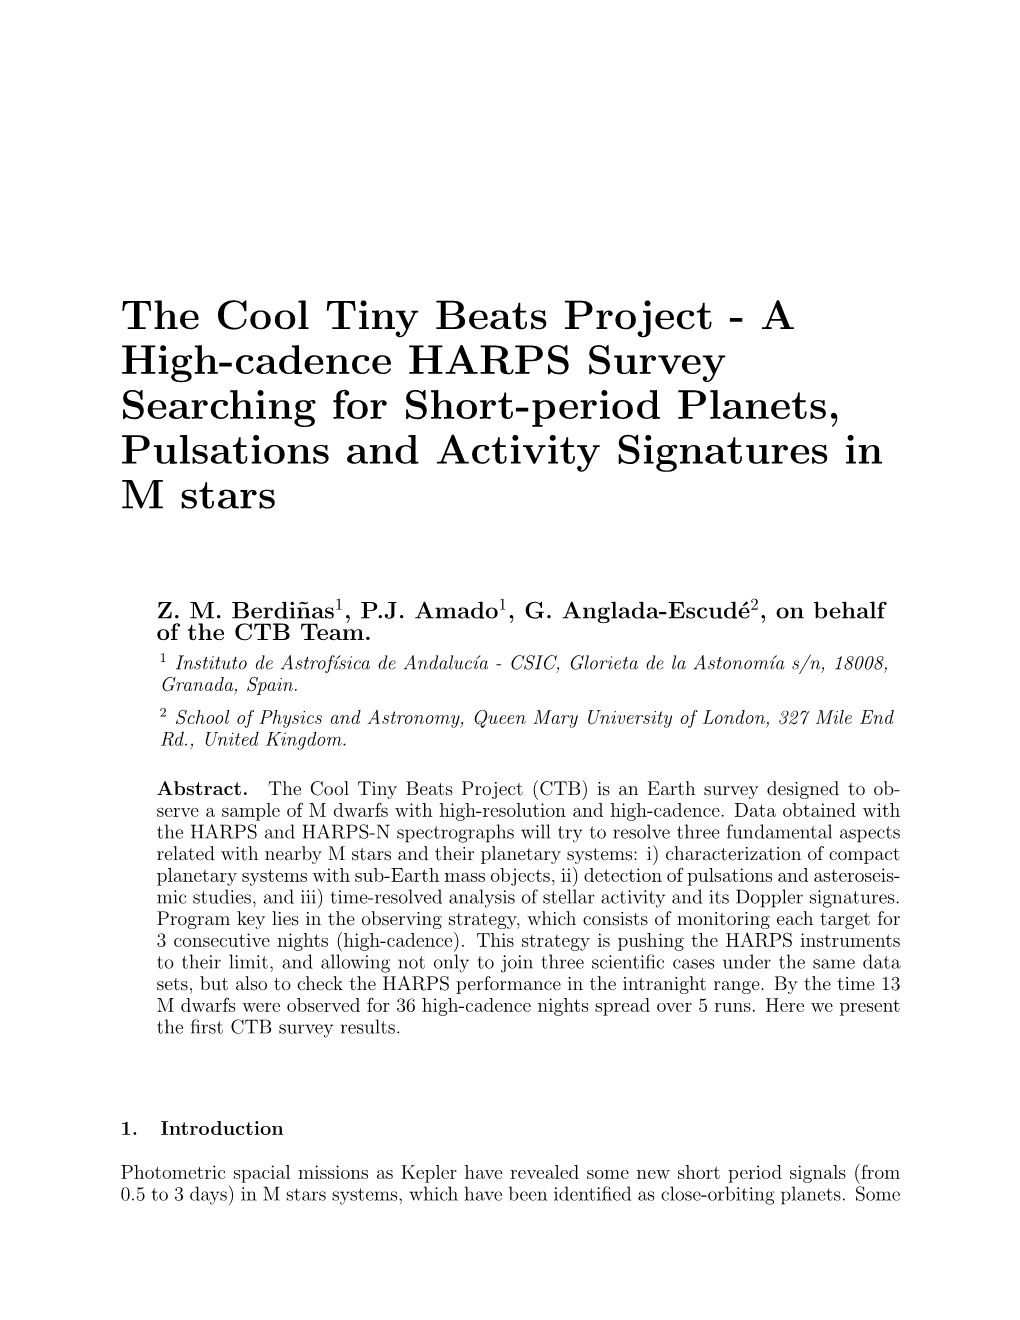 The Cool Tiny Beats Project - a High-Cadence HARPS Survey Searching for Short-Period Planets, Pulsations and Activity Signatures in M Stars